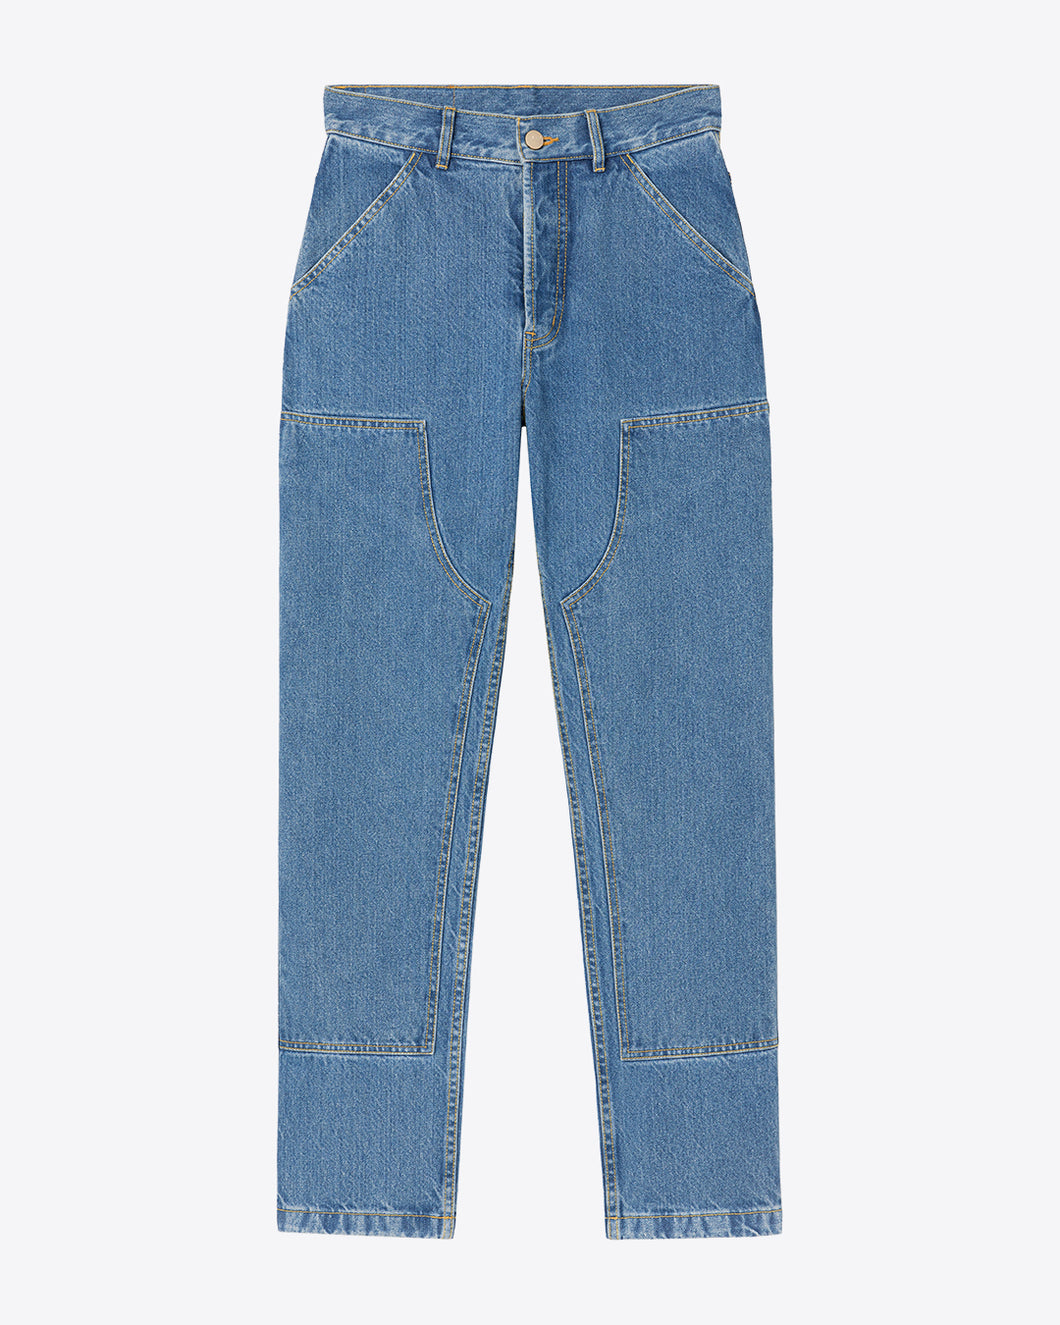 WORKERS PANTS - BLUE